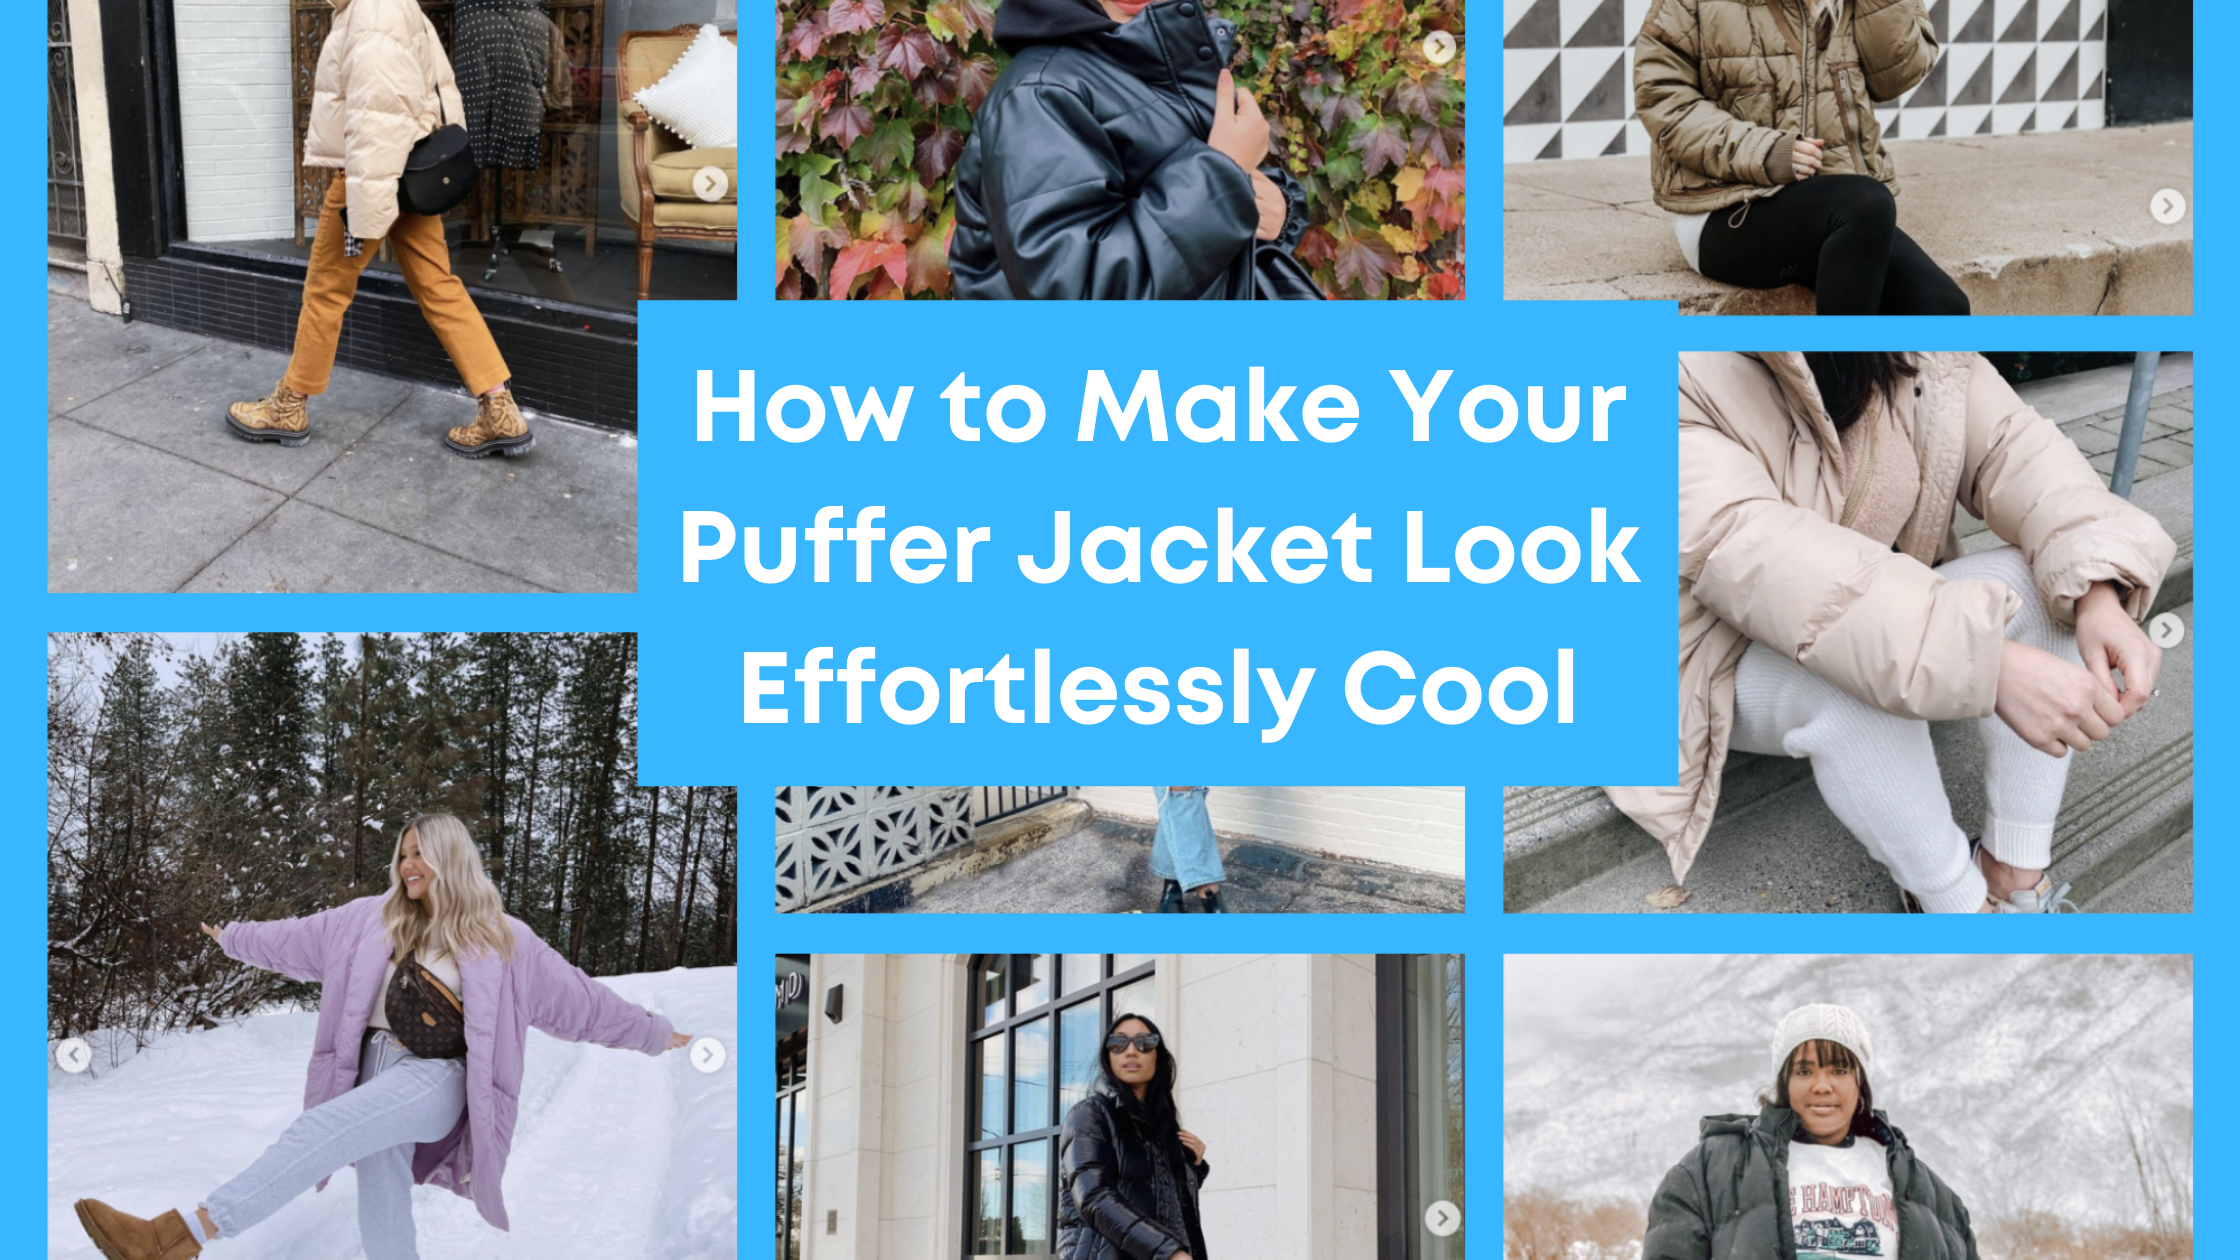 How to Make Your Puffer Jacket Look Effortlessly Cool